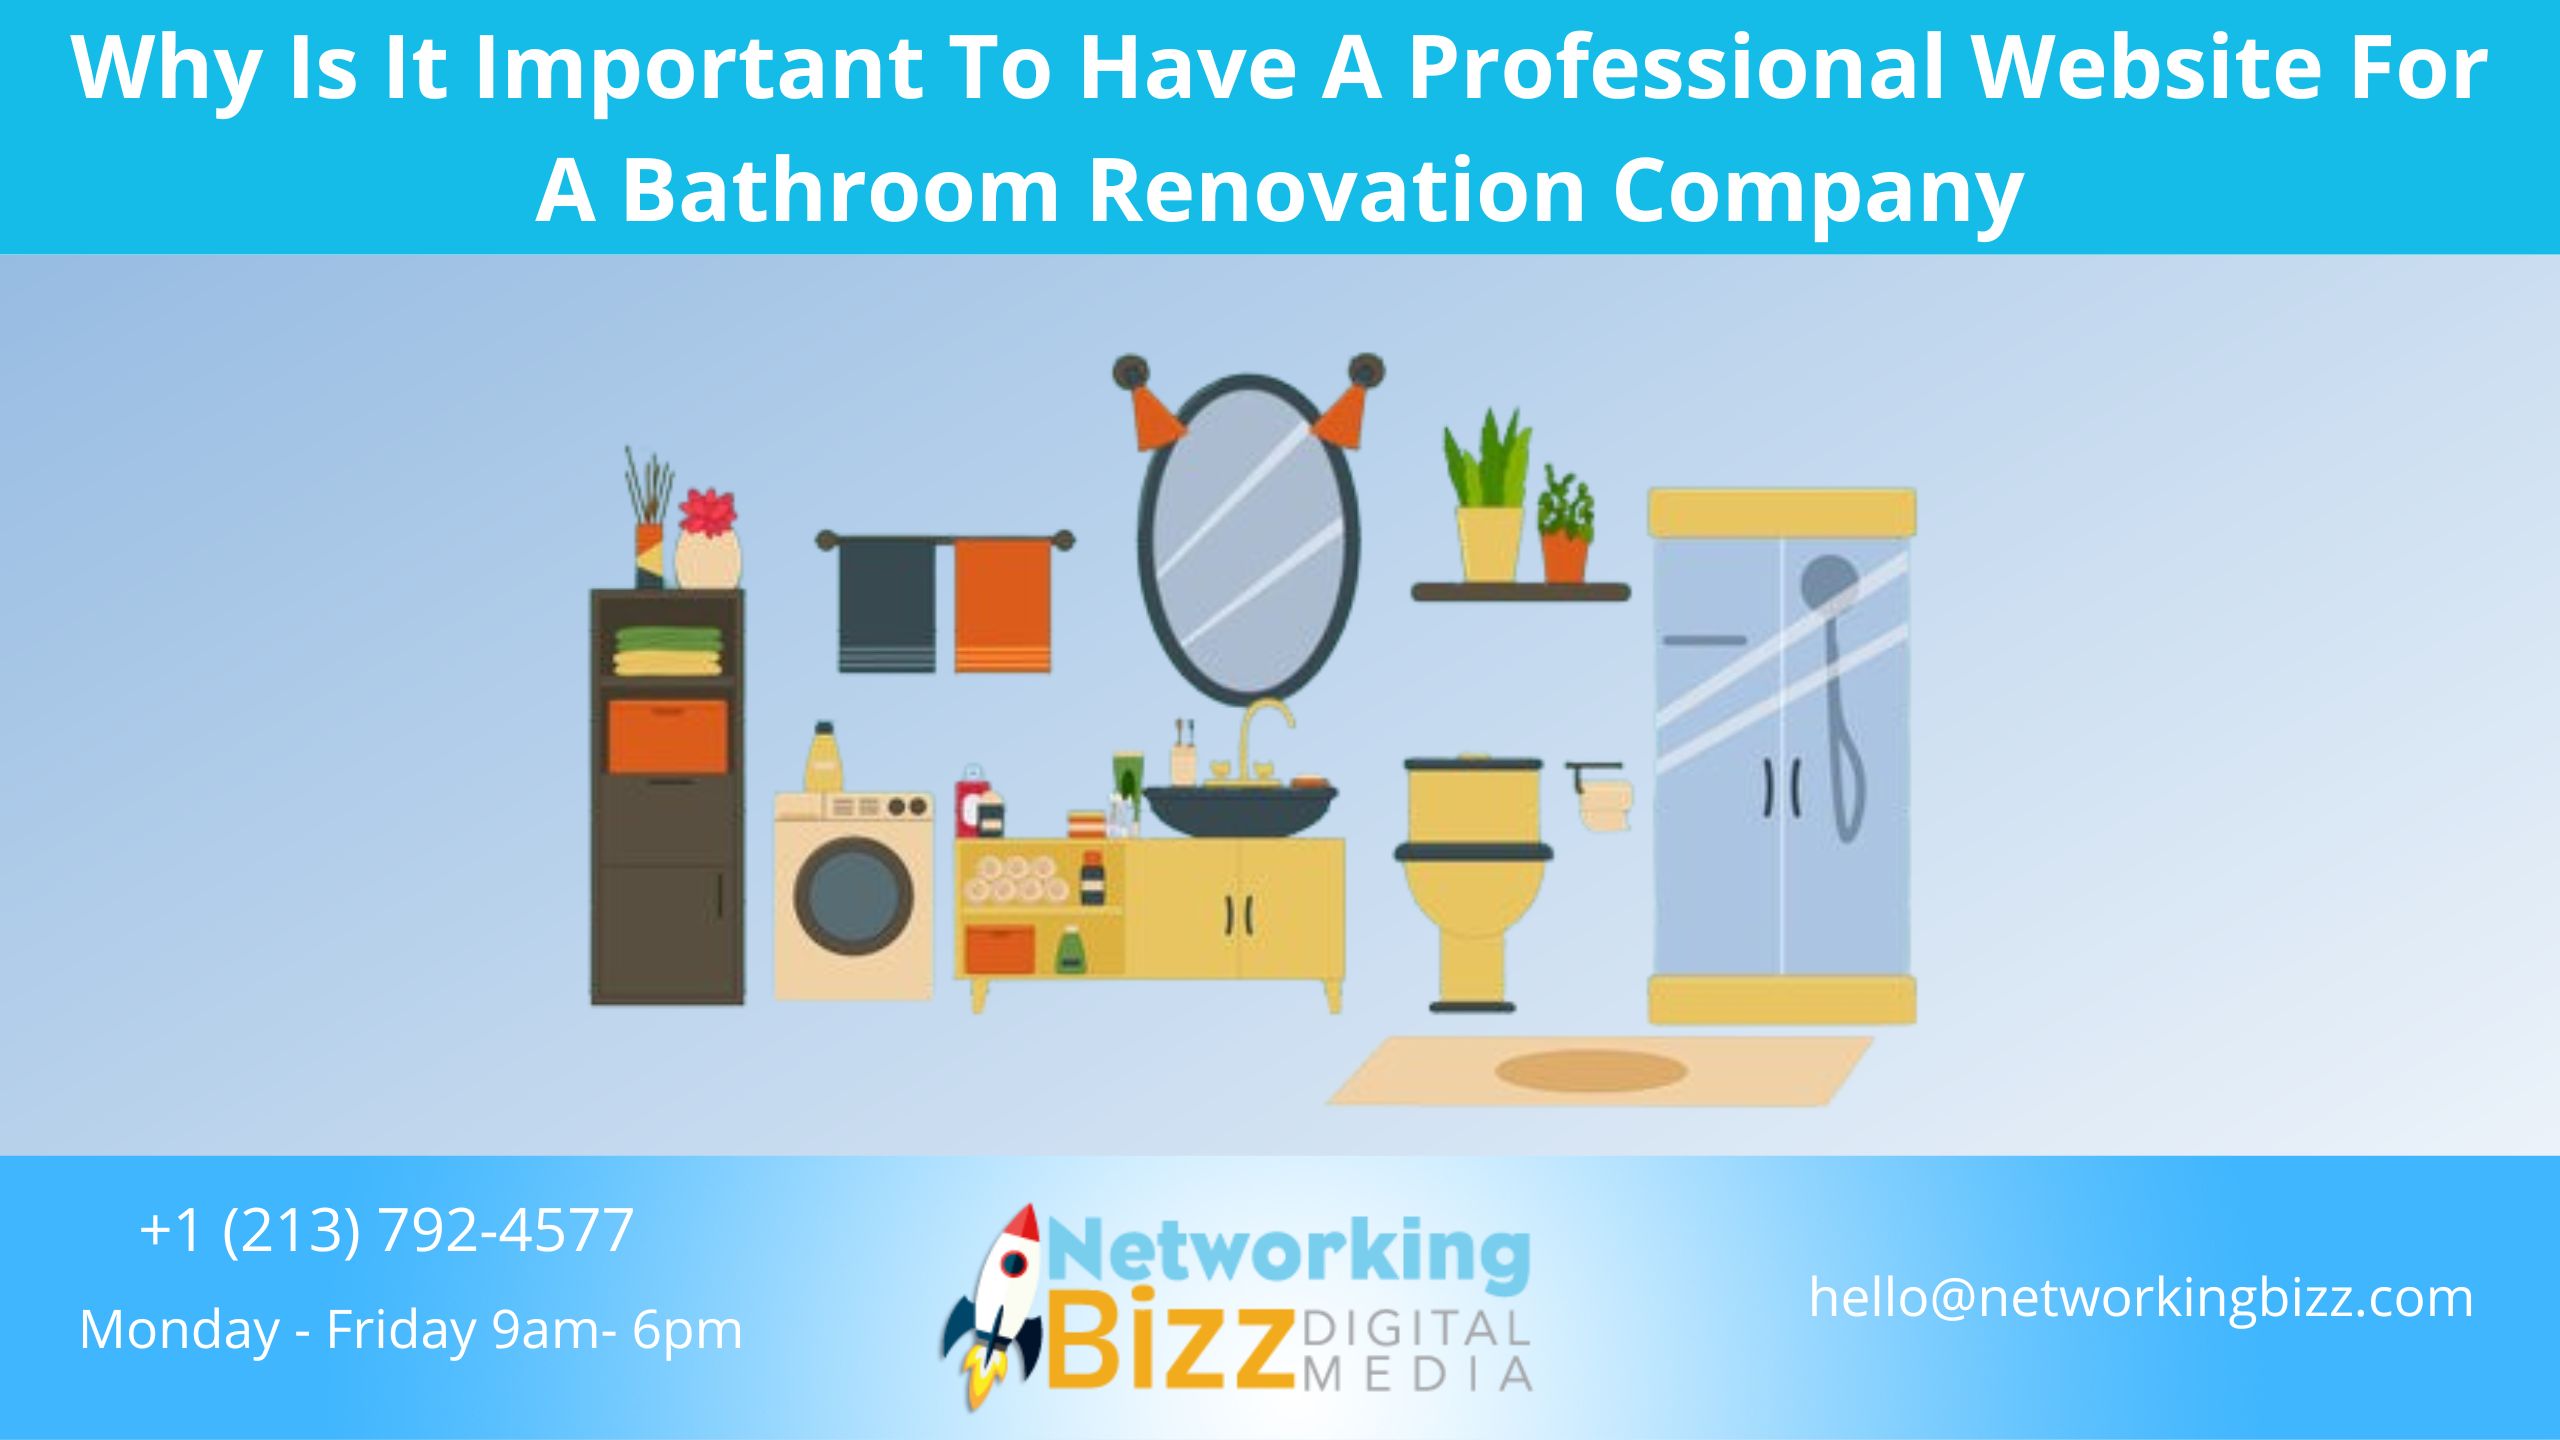 Why Is It Important To Have A Professional Website For A Bathroom Renovation Company